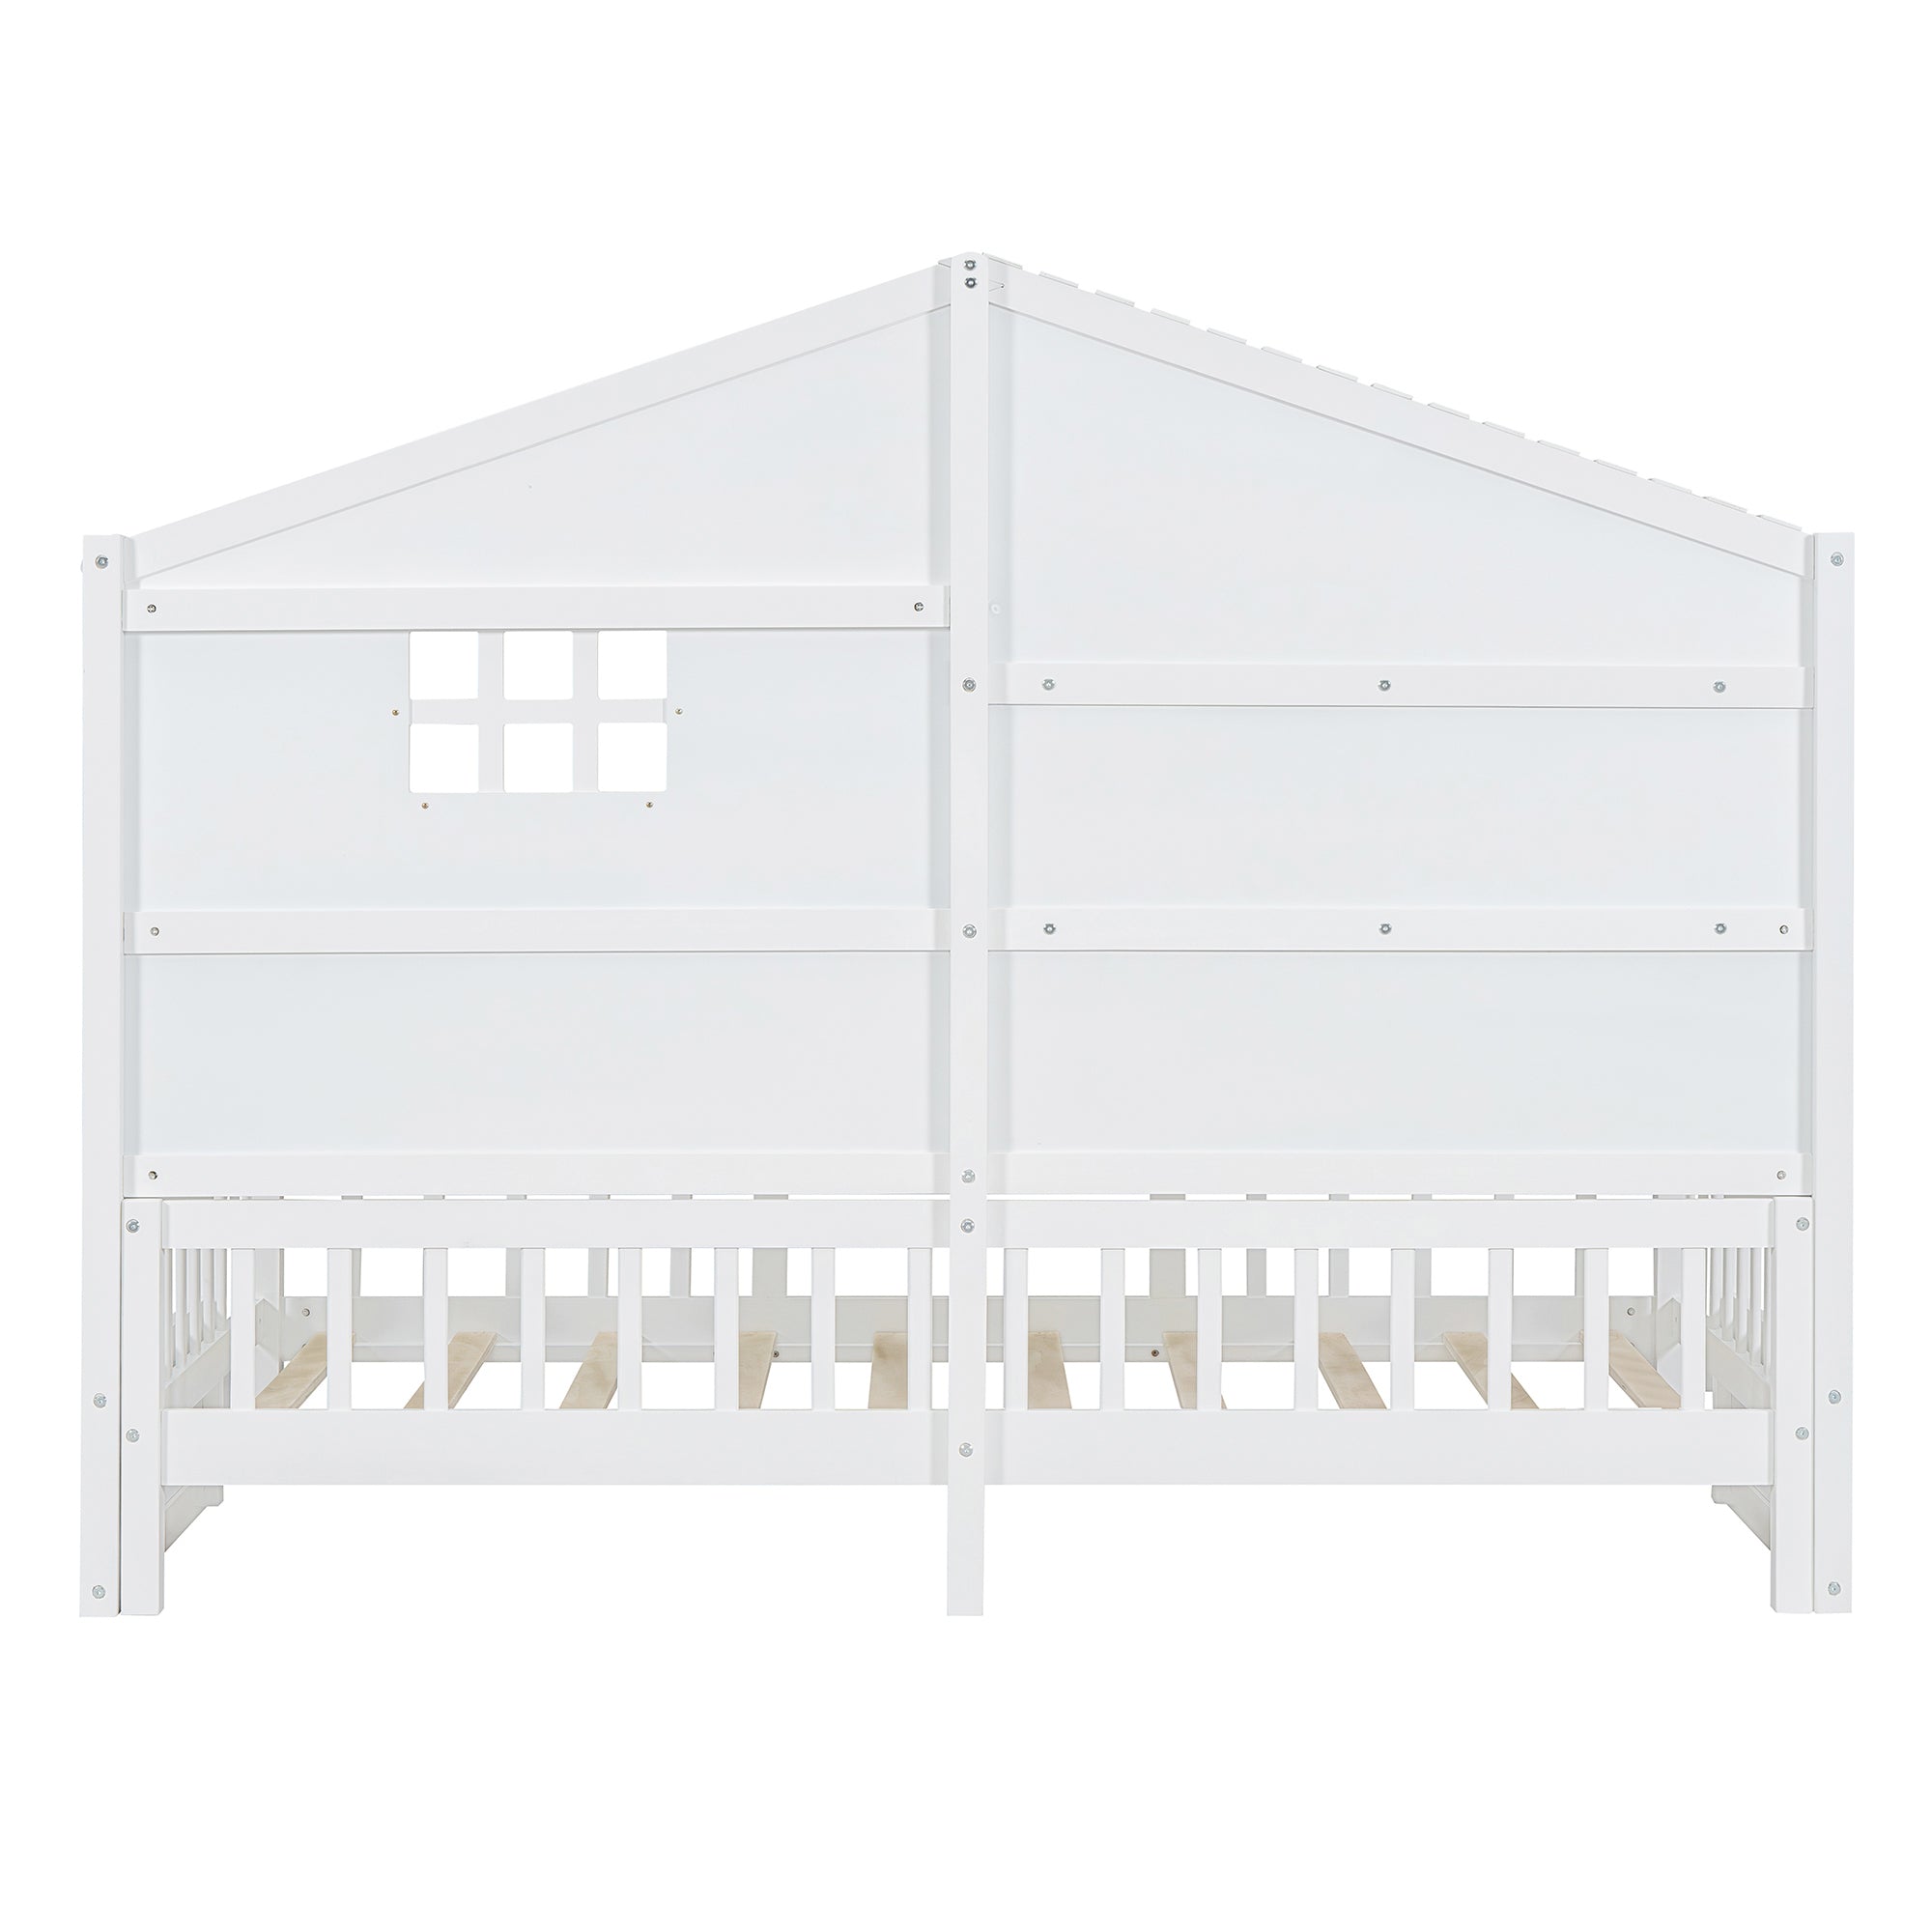 Bellemave® Twin Size House Bed with Shelves,Window and Sparkling Light Strip on the Roof Bellemave®